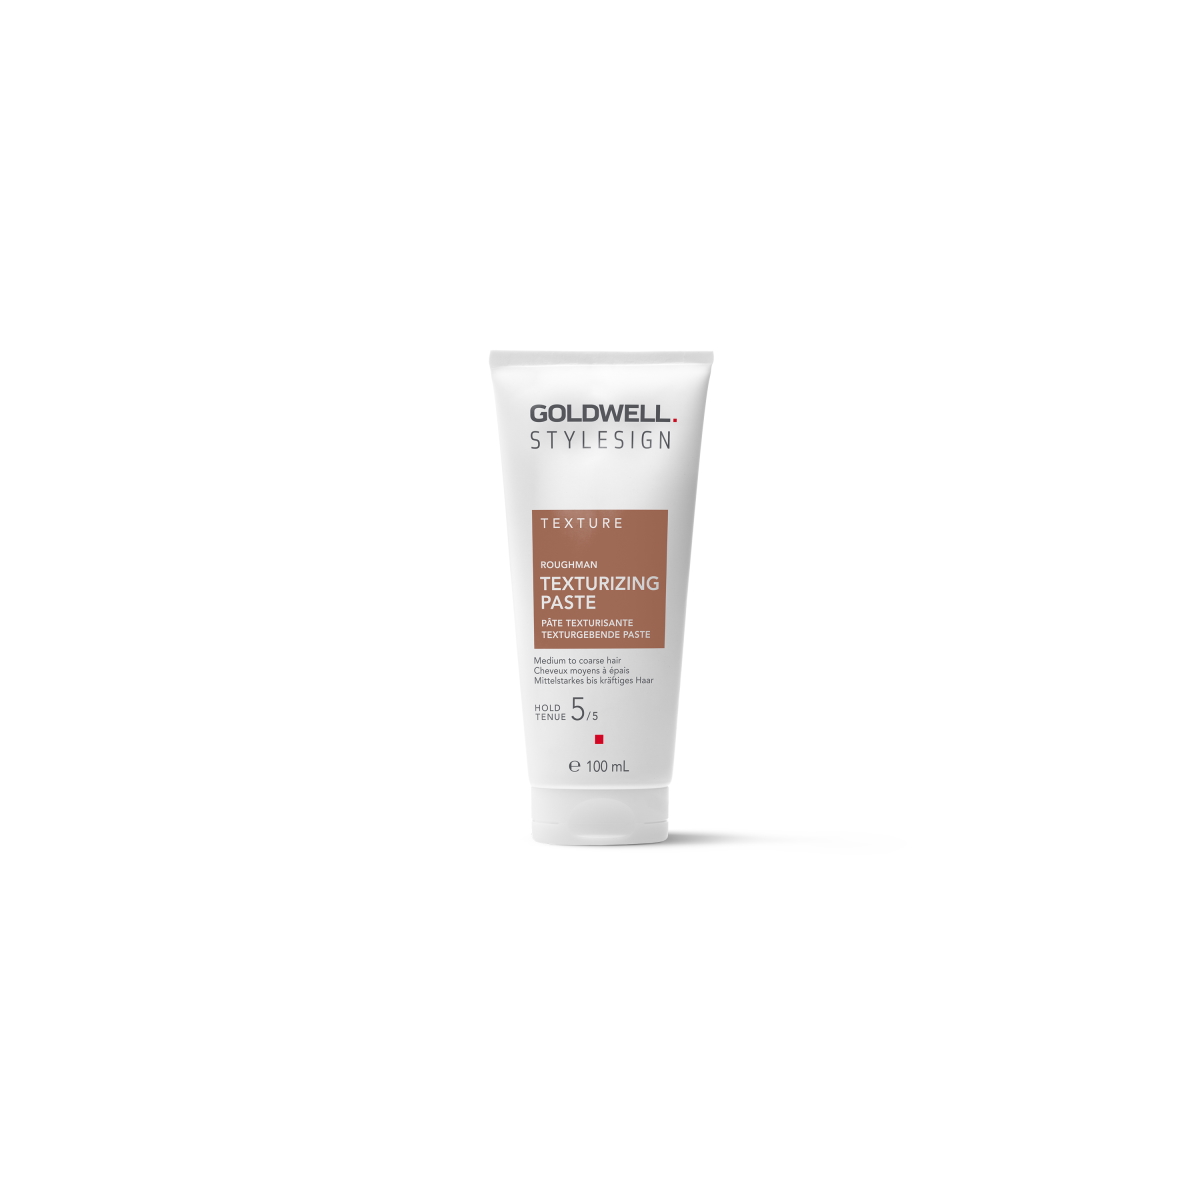 Goldwell Style Sign Texture Texturizing Paste 100ml